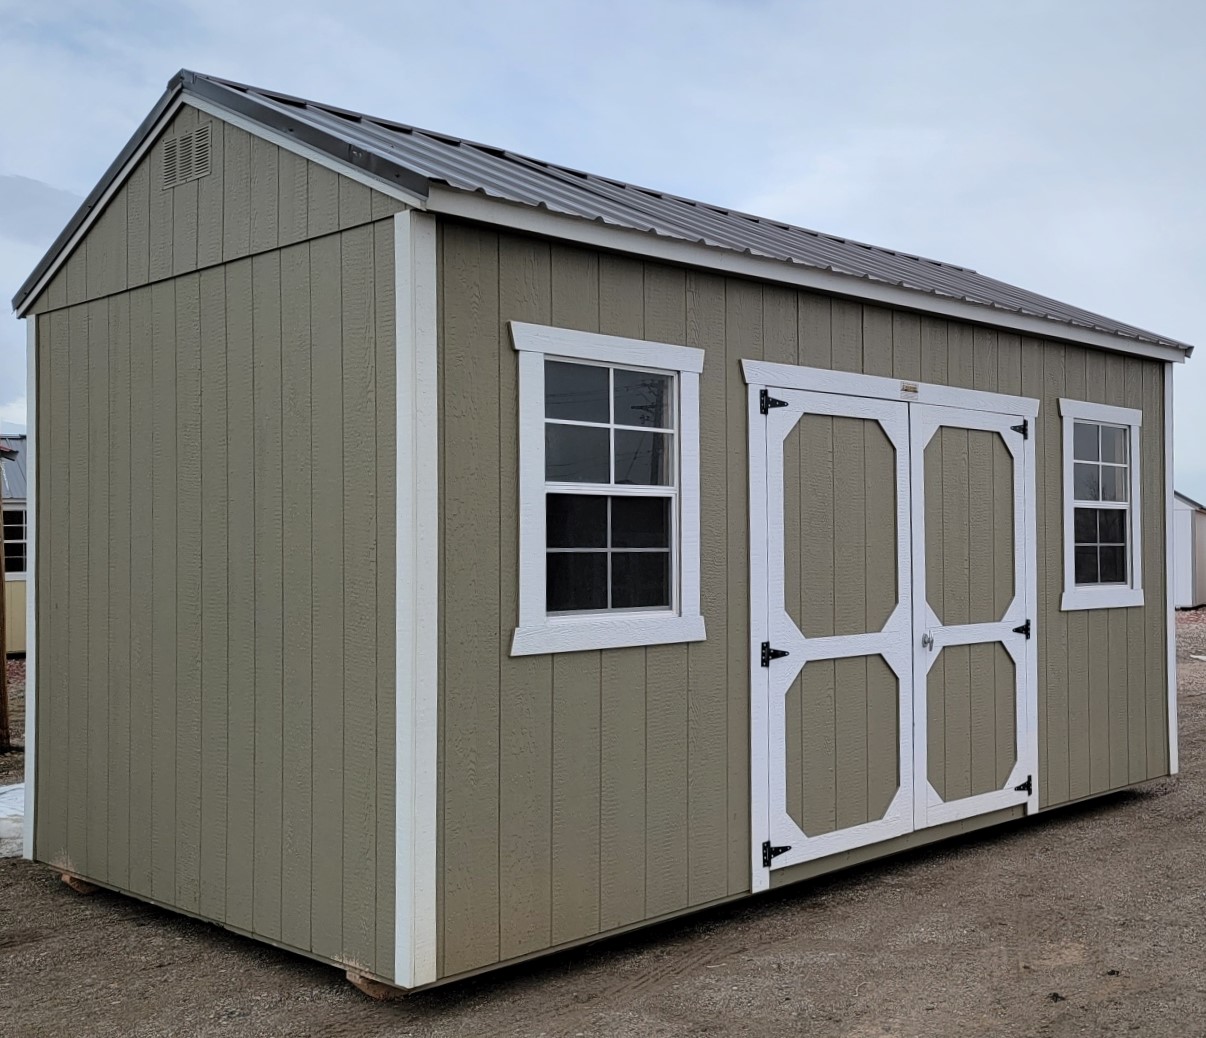 Buy Now: 10x16 Painted Utility Shed For Sale | Casper Sheds For Sale